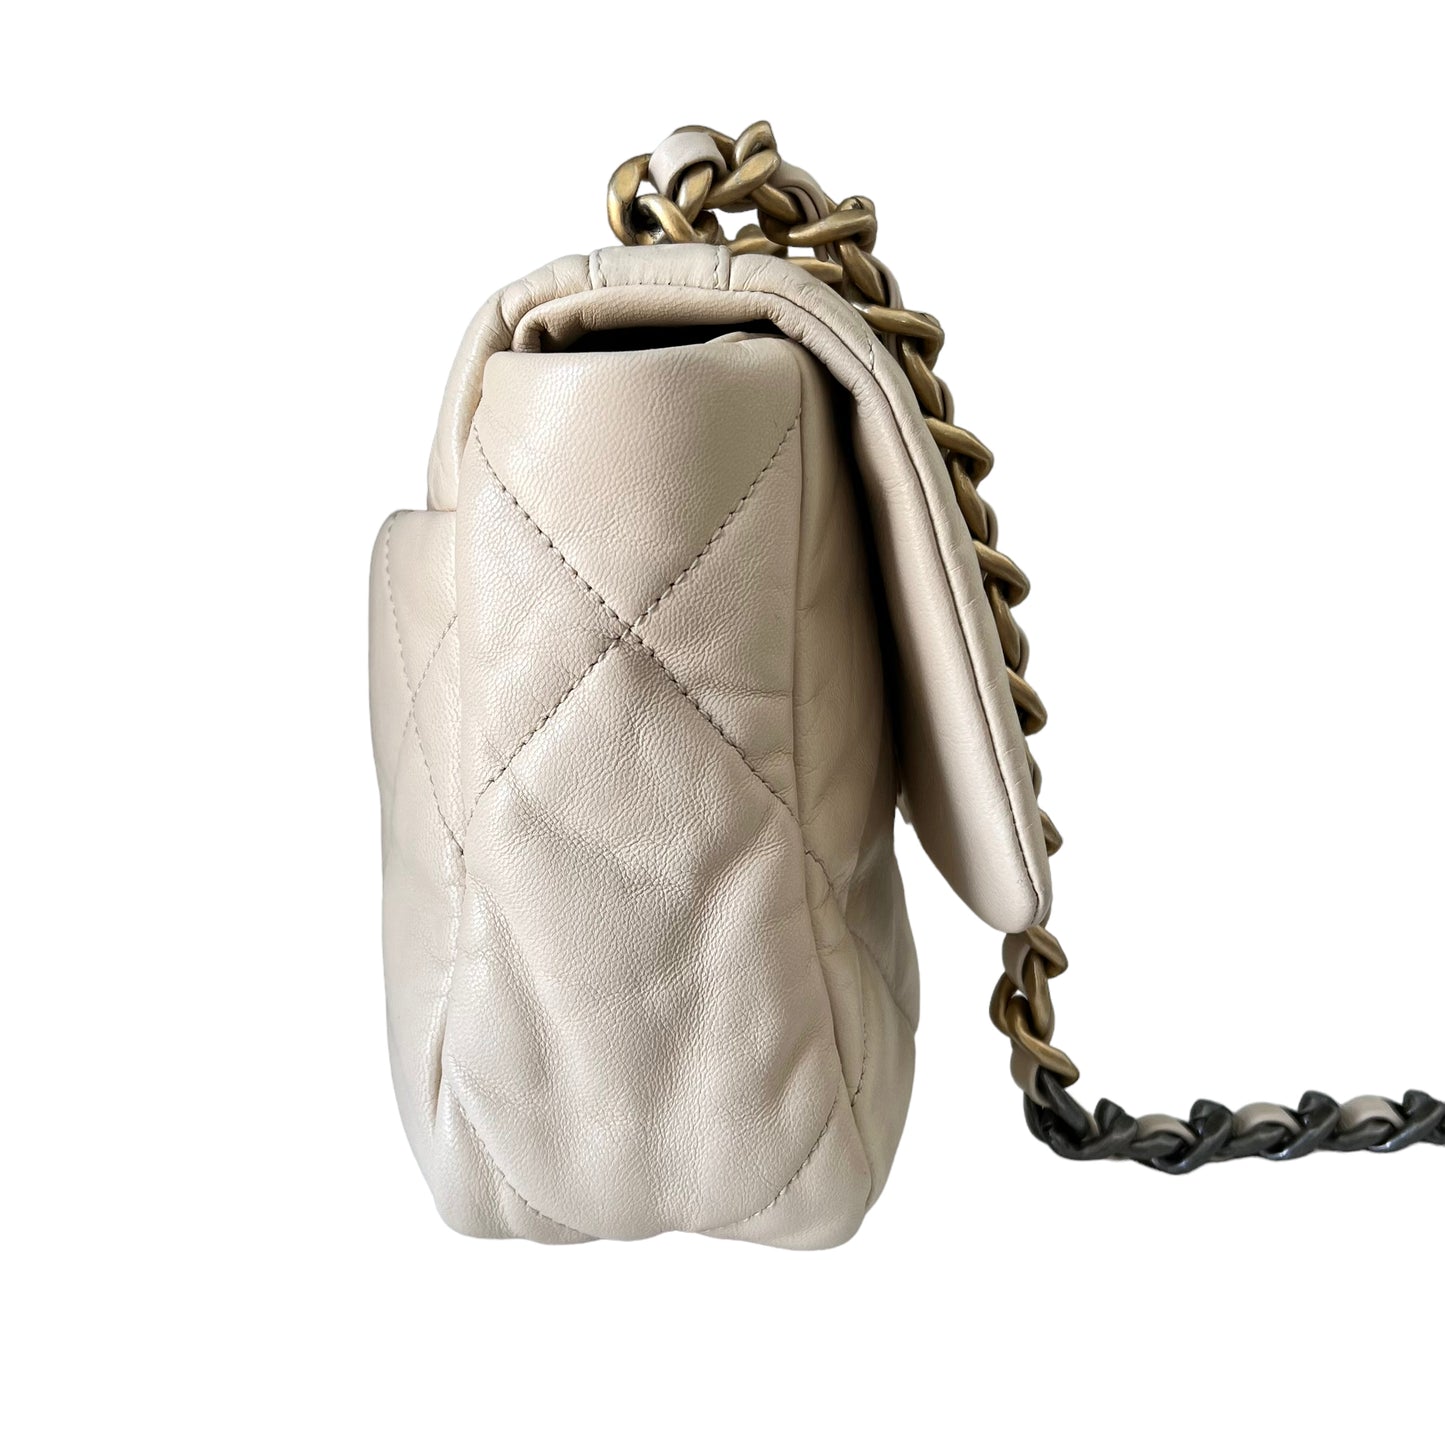 CHANEL 19 Beige Lambskin Quilted Leather Medium Flap Bag